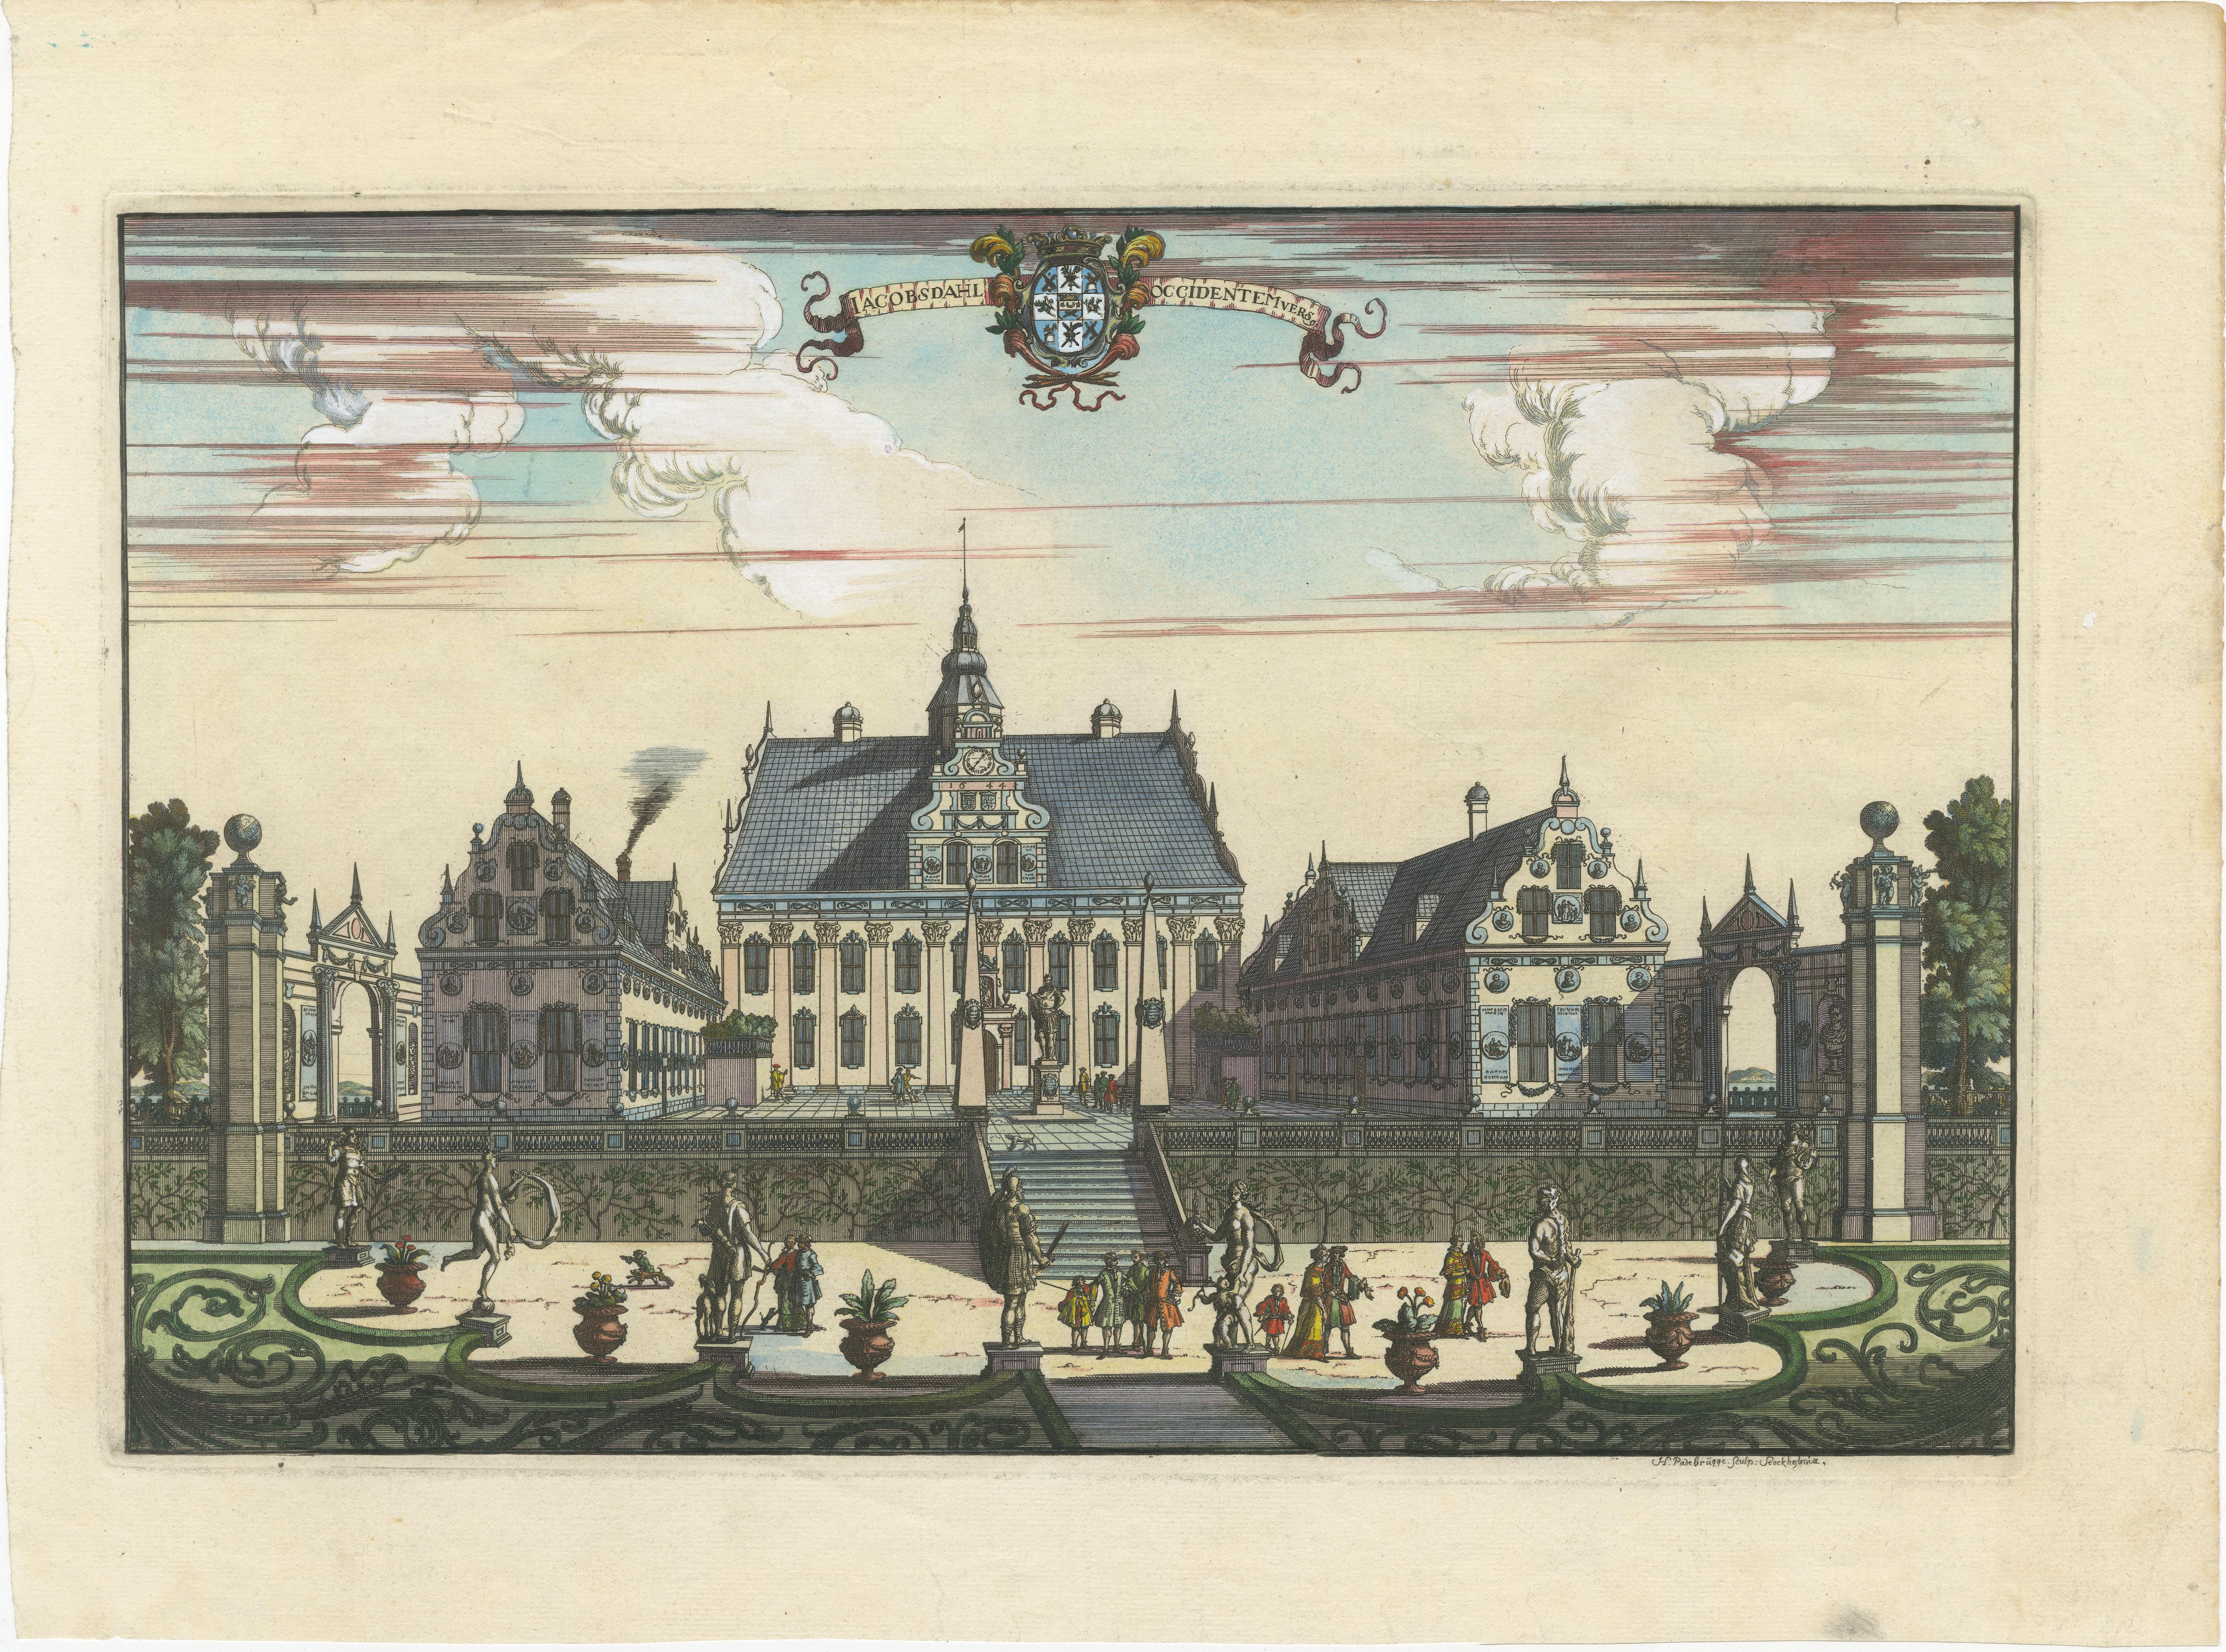 This original print is a hand-colored engraving of Ulriksdal Castle, also historically known as 